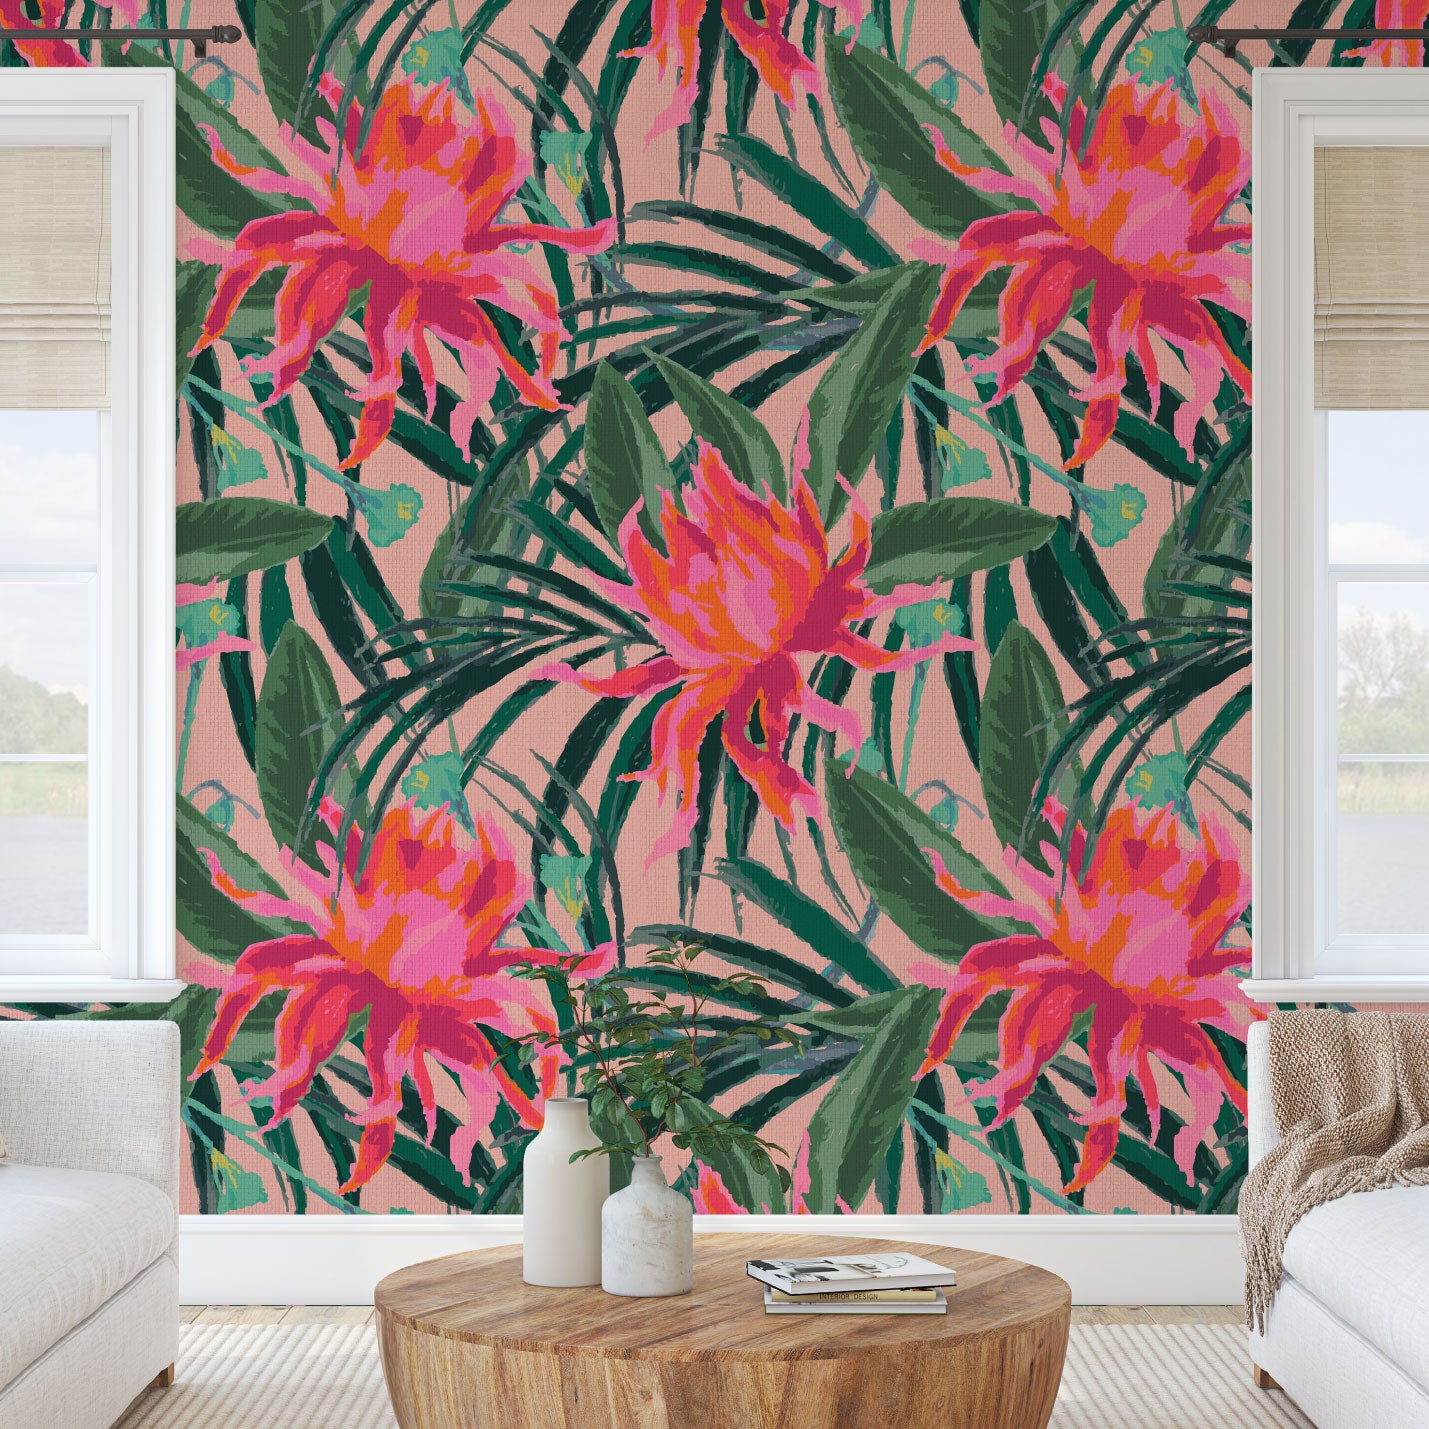 paper weave paperweave wallpaper with light pink based featuring oversized painterly tropical flowers and palm leafs in striking shades of pink and leafs in shades of deep green Natural Textured Eco-Friendly Non-toxic High-quality Sustainable Interior Design Bold Custom Tailor-made Retro chic Tropical Jungle Coastal preppy Garden Seaside Coastal Seashore Waterfront Vacation home styling Retreat Relaxed beach vibes Beach cottage Shoreline Oceanfront botanical palm leaf living room